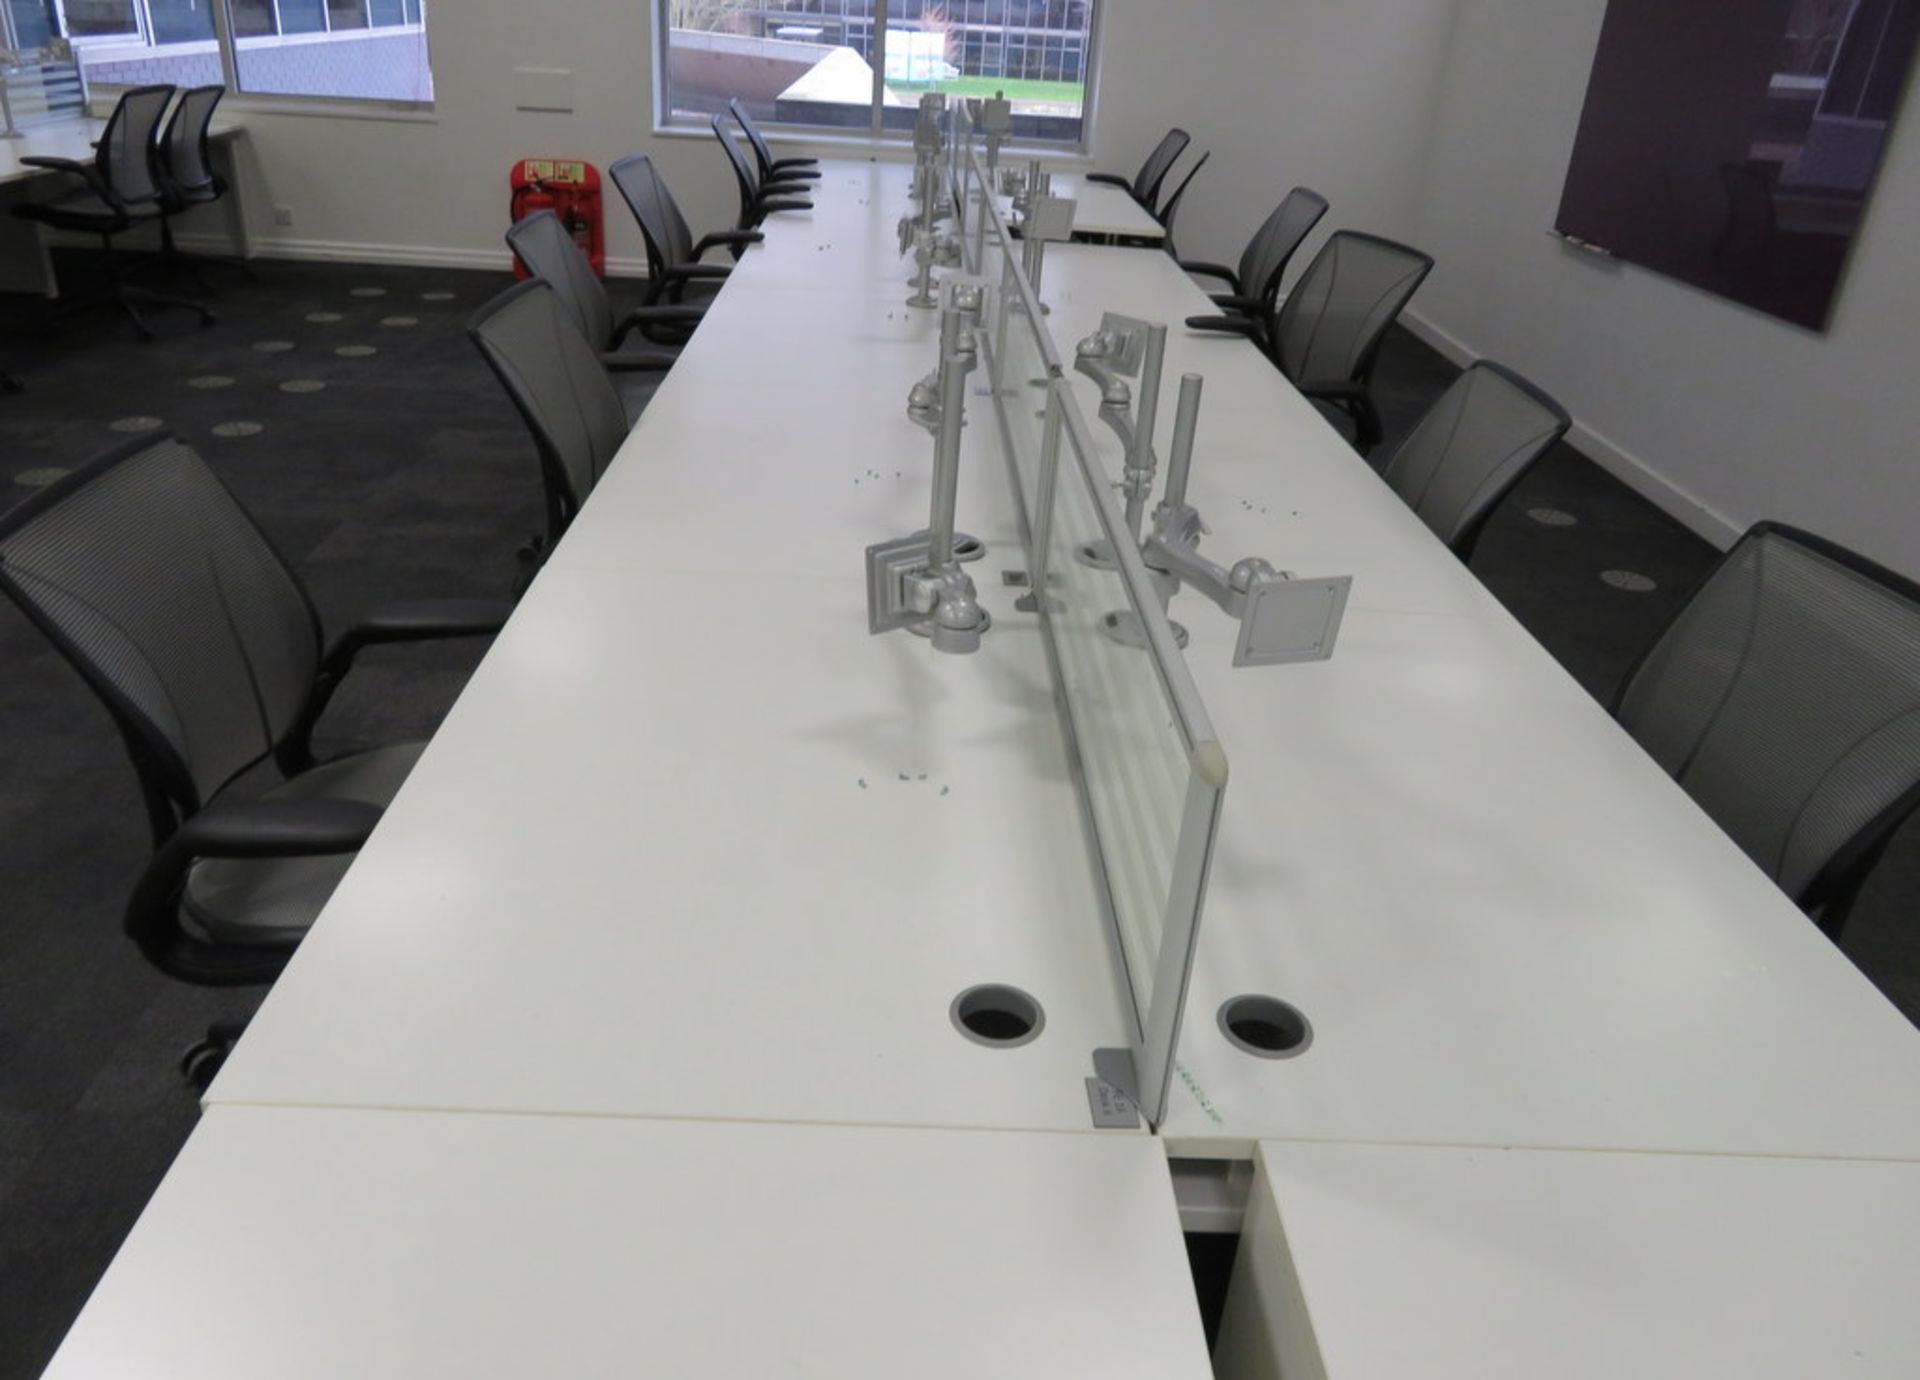 12 Person Desk Arrangement With Dividers & Monitor Arms. Please Note The Chairs Are Not Included. - Image 2 of 4